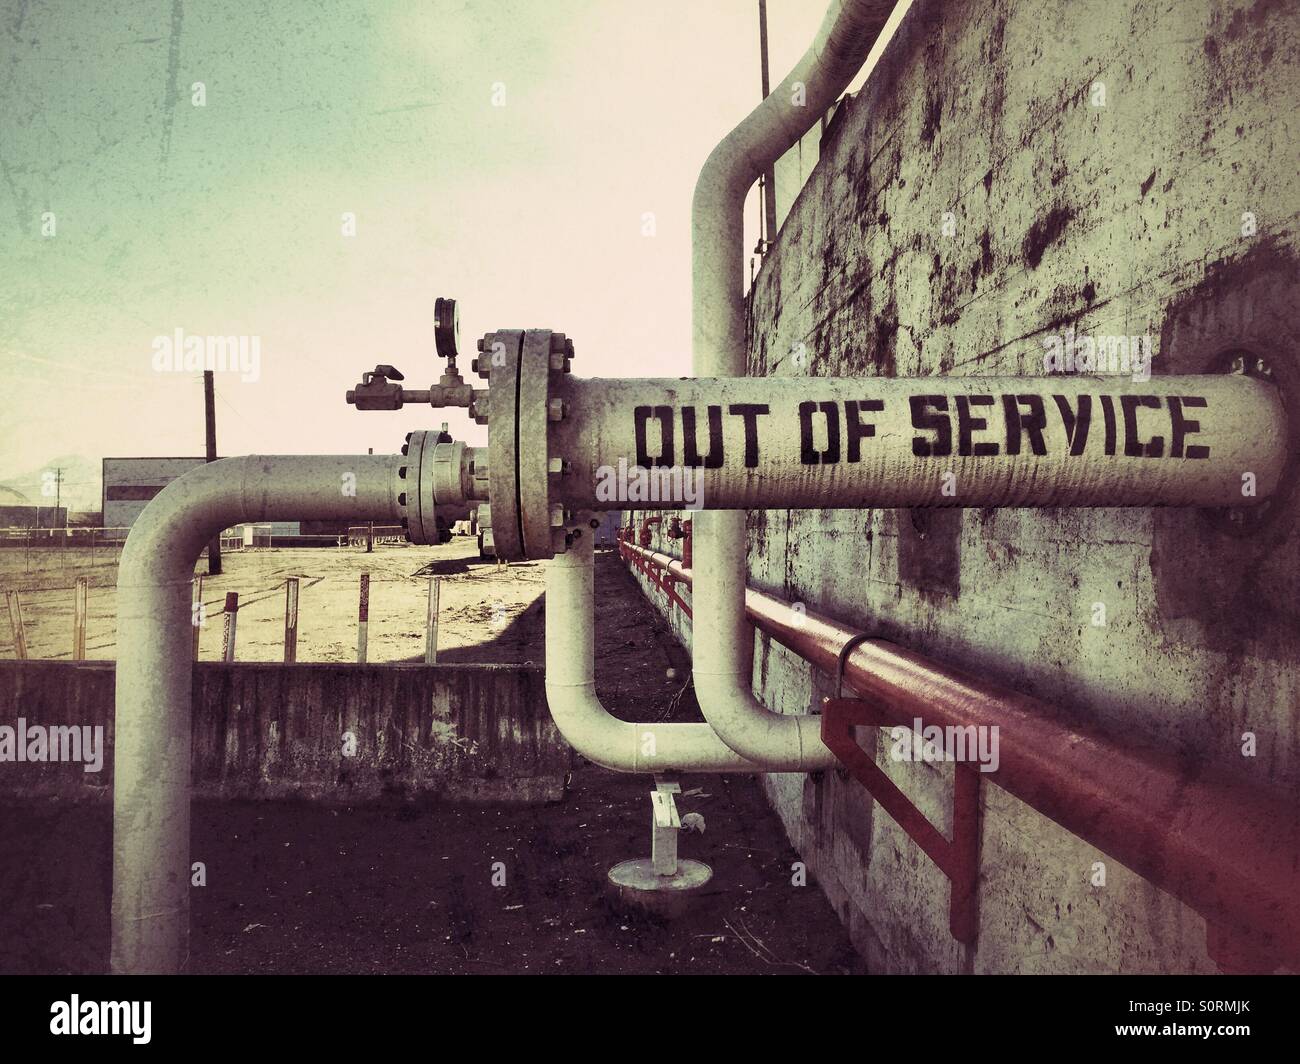 Out of service sign written on the pipe at oil refinery plant in Tacoma, Washington state Stock Photo